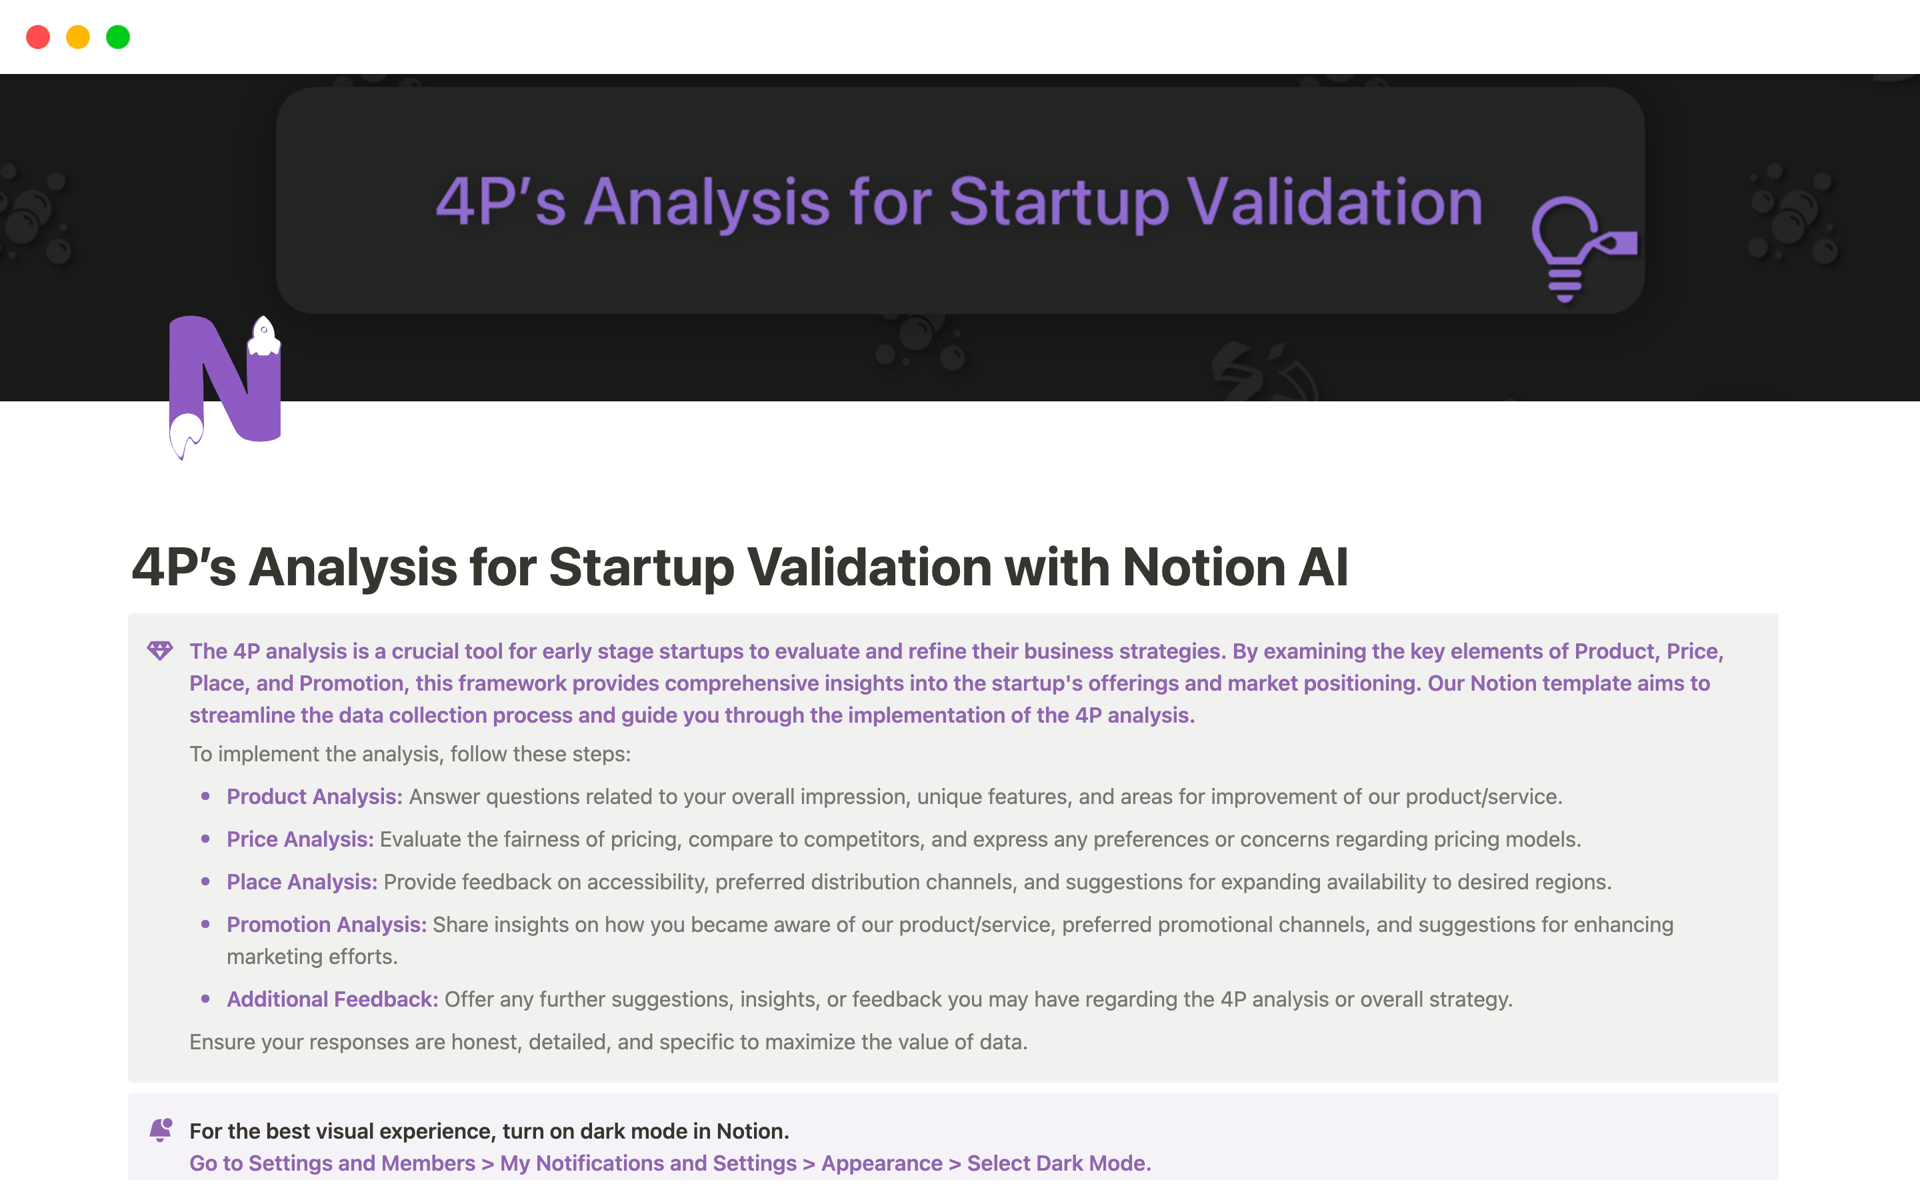 For Early Stage Startup, The 4P Analysis Notion Template provides a comprehensive framework for evaluating product, price, place, and promotion strategies, enabling early-stage startups to make informed decisions and maximize their business potential.